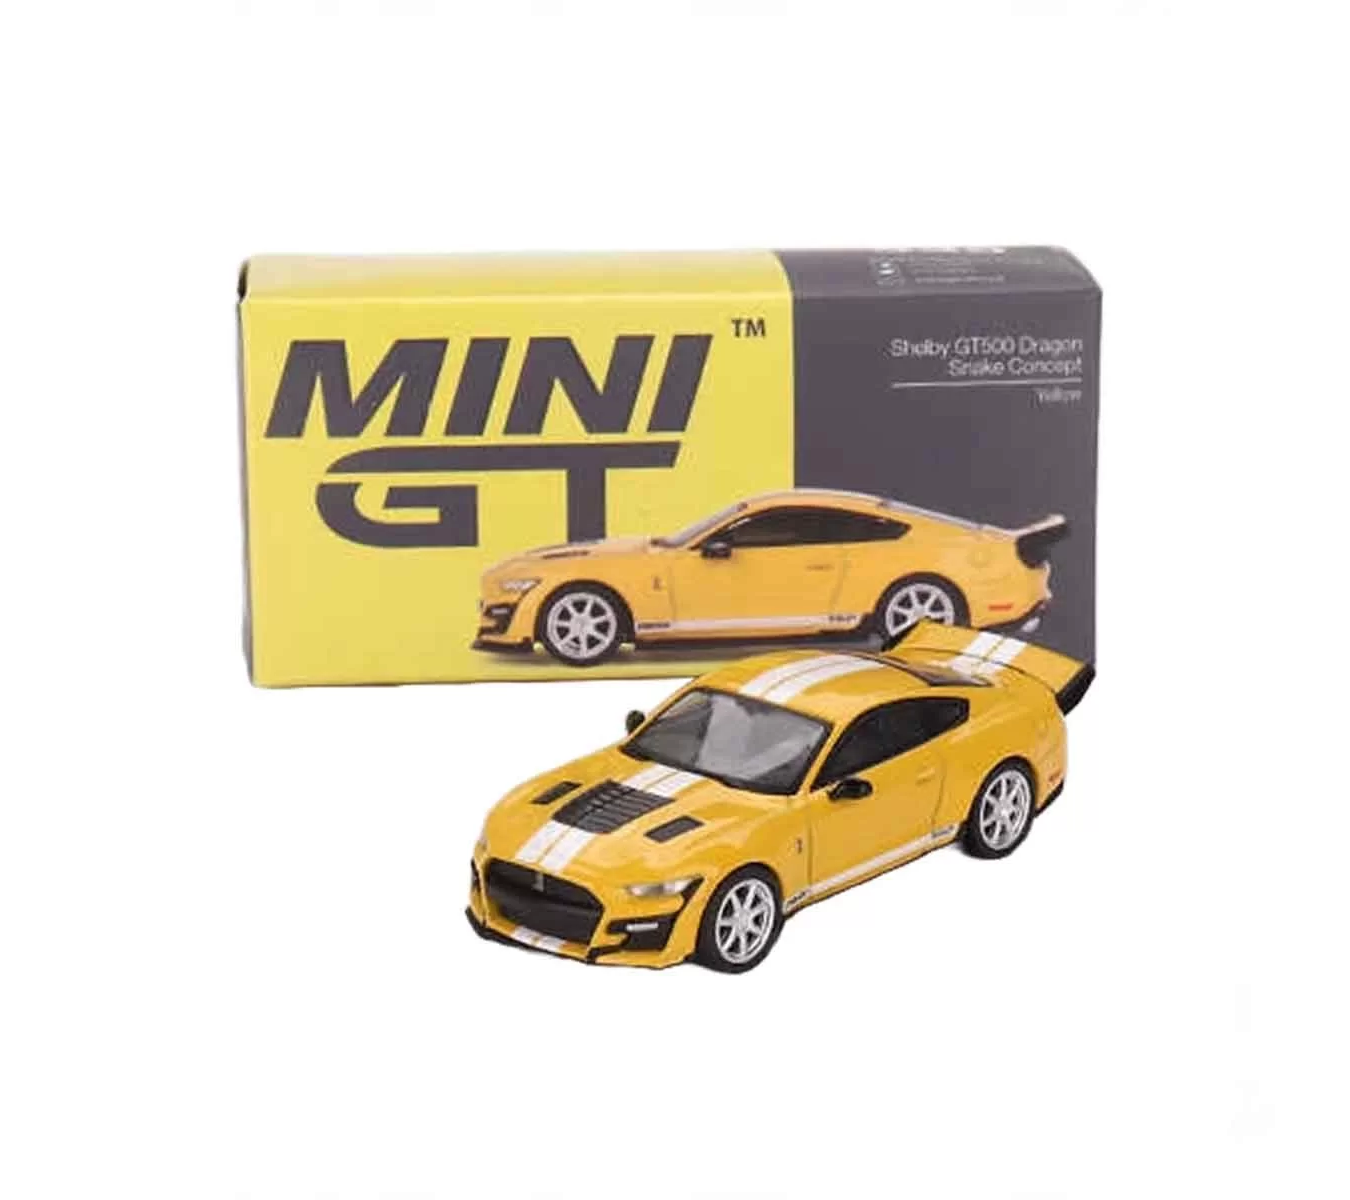 Mini GT 1:64 Shelby GT500 Dragon Snake Concept Yellow